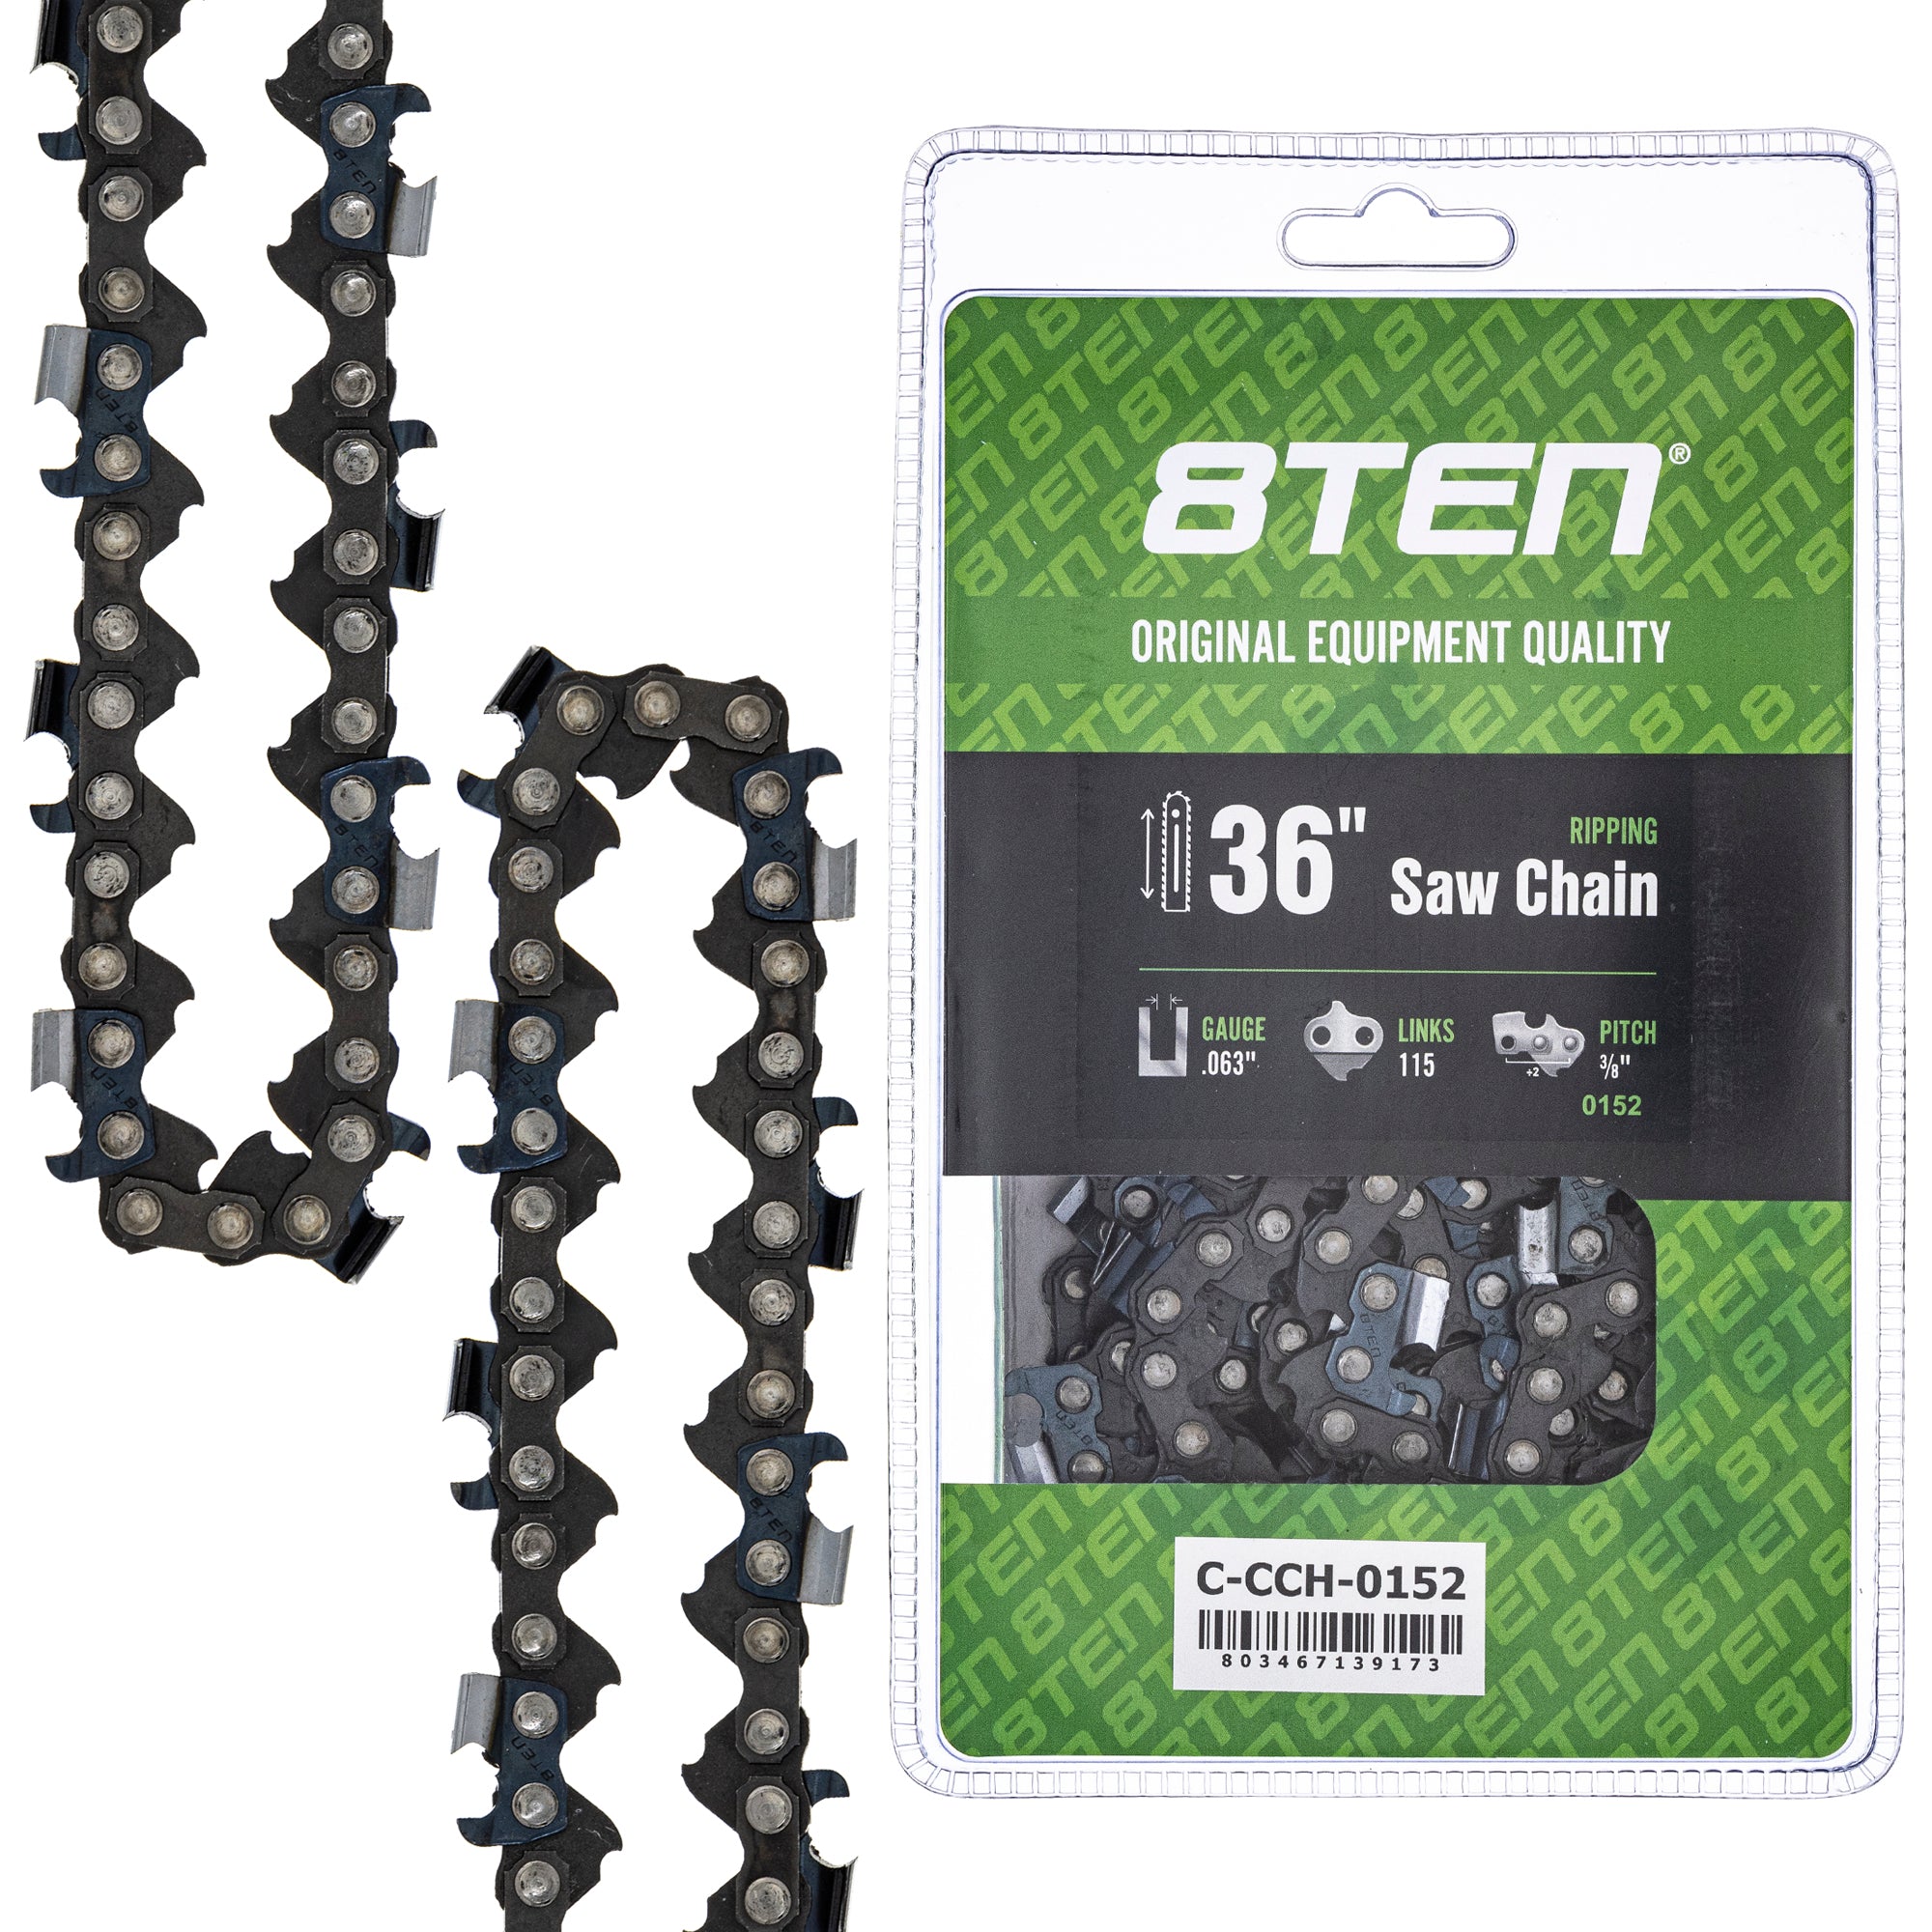 Chainsaw Chain 36 Inch .063 3/8 115DL for zOTHER Oregon PS DCS9010FL DCS9000 DCS7901 8TEN 810-CCC2374H